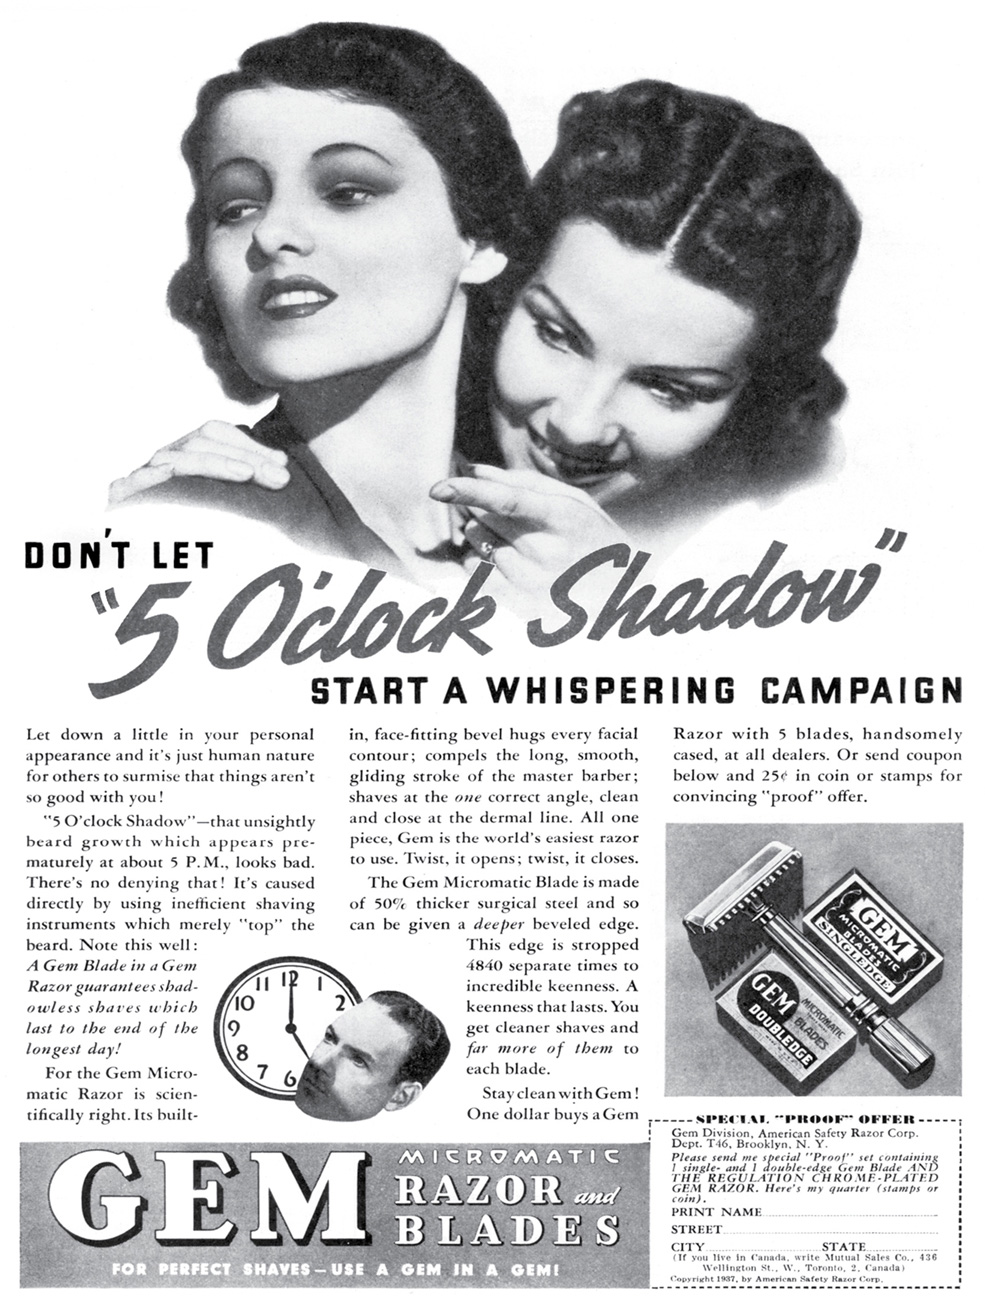 Advertisement for Gem Razor and Blades, Time, 11 October 1937.